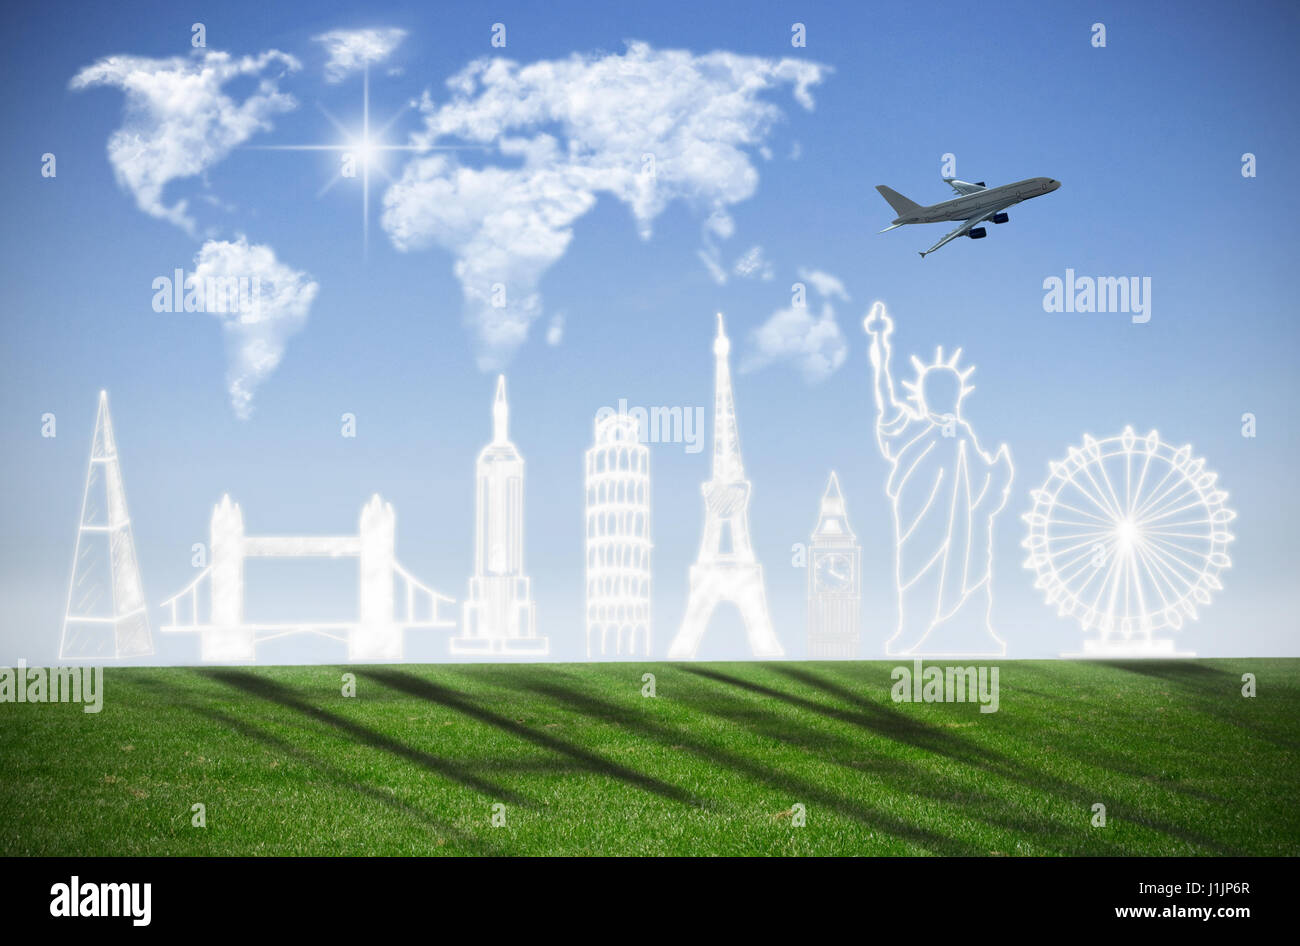 Clouds in the shape of a global tourist landmakrs with world map against blue sky Stock Photo